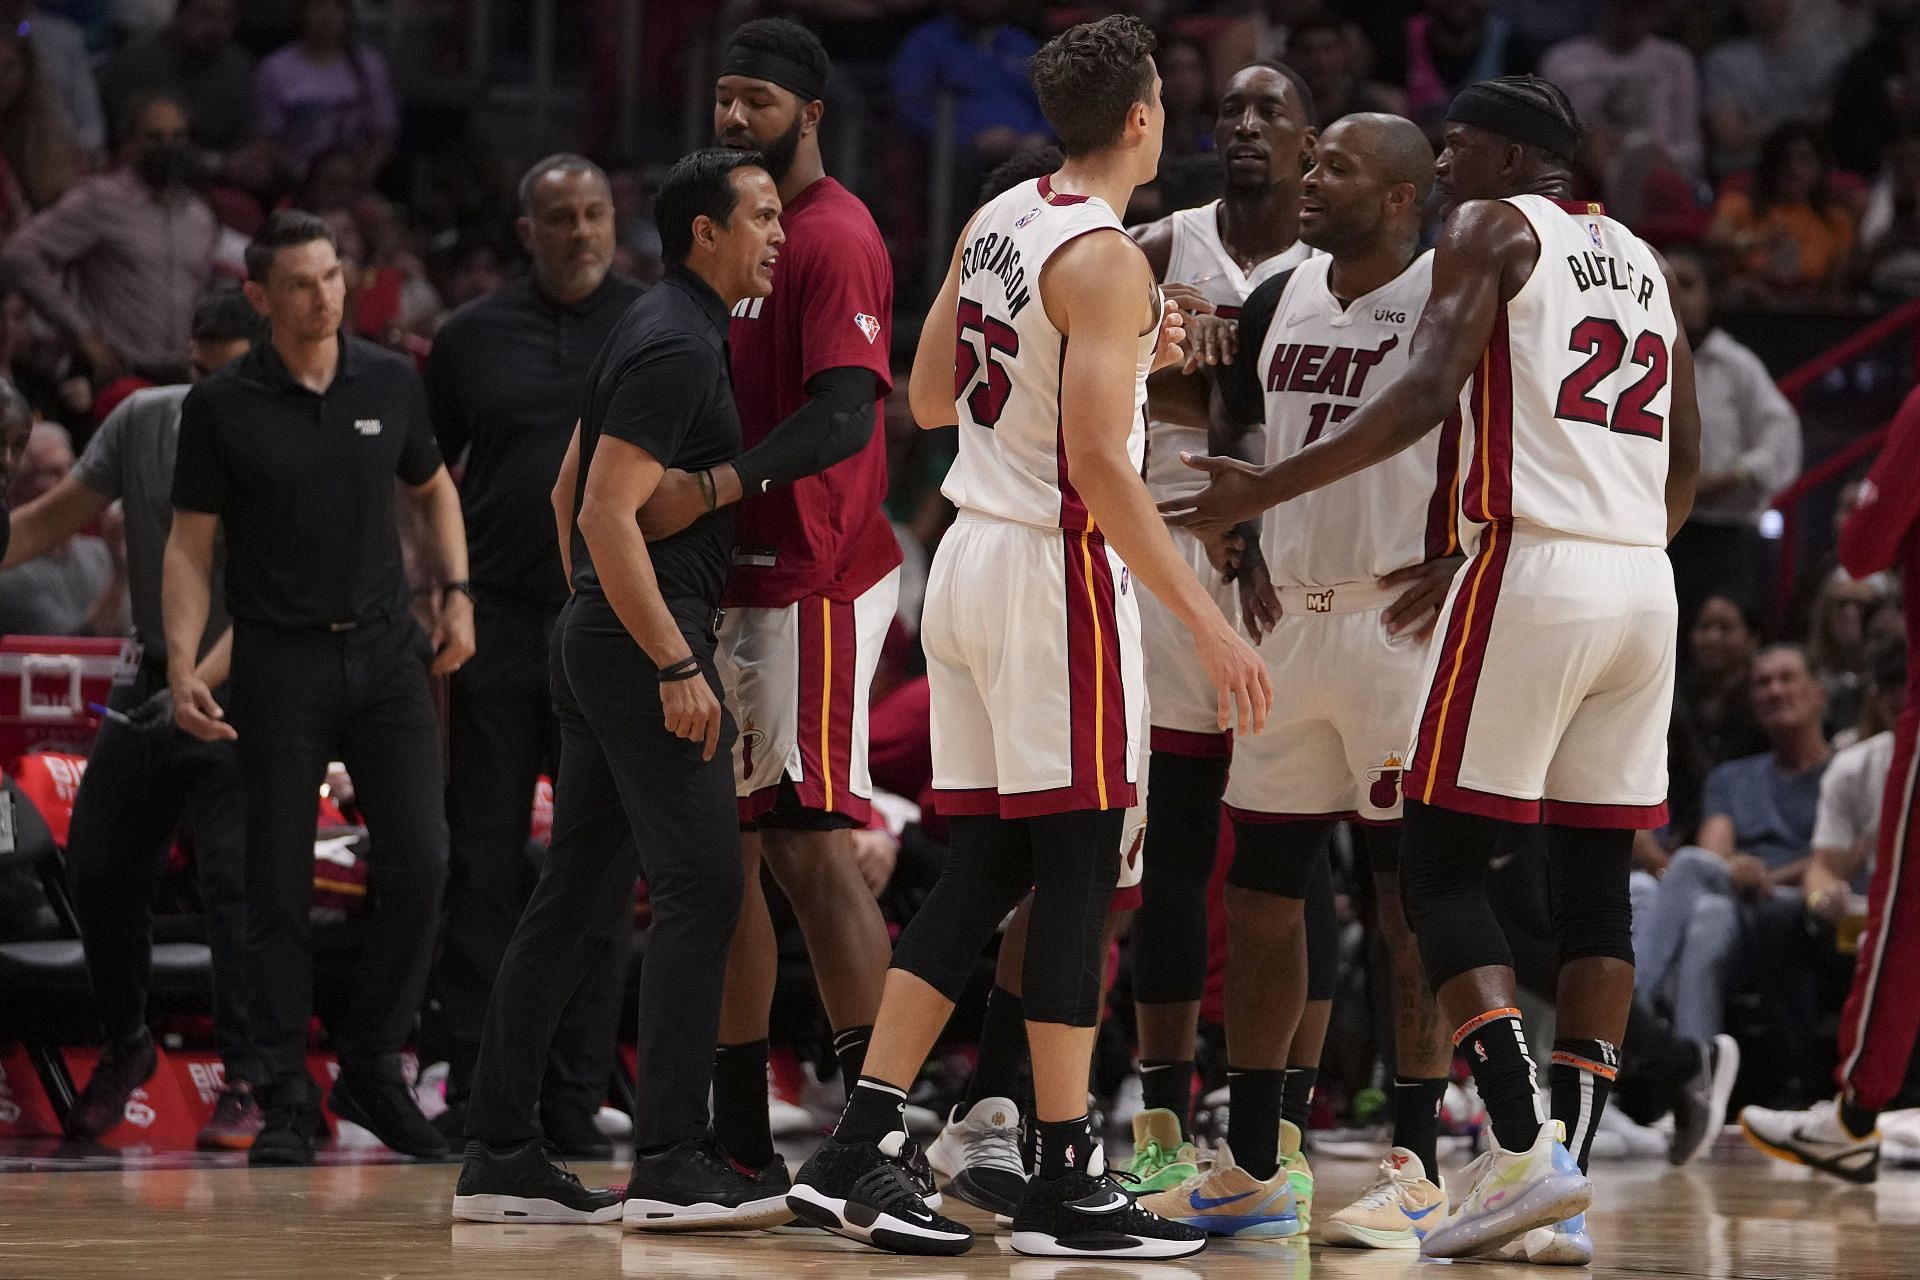 Jimmy Butler gets into a heated argument with Miami Heat head coach Erik Spoelstra